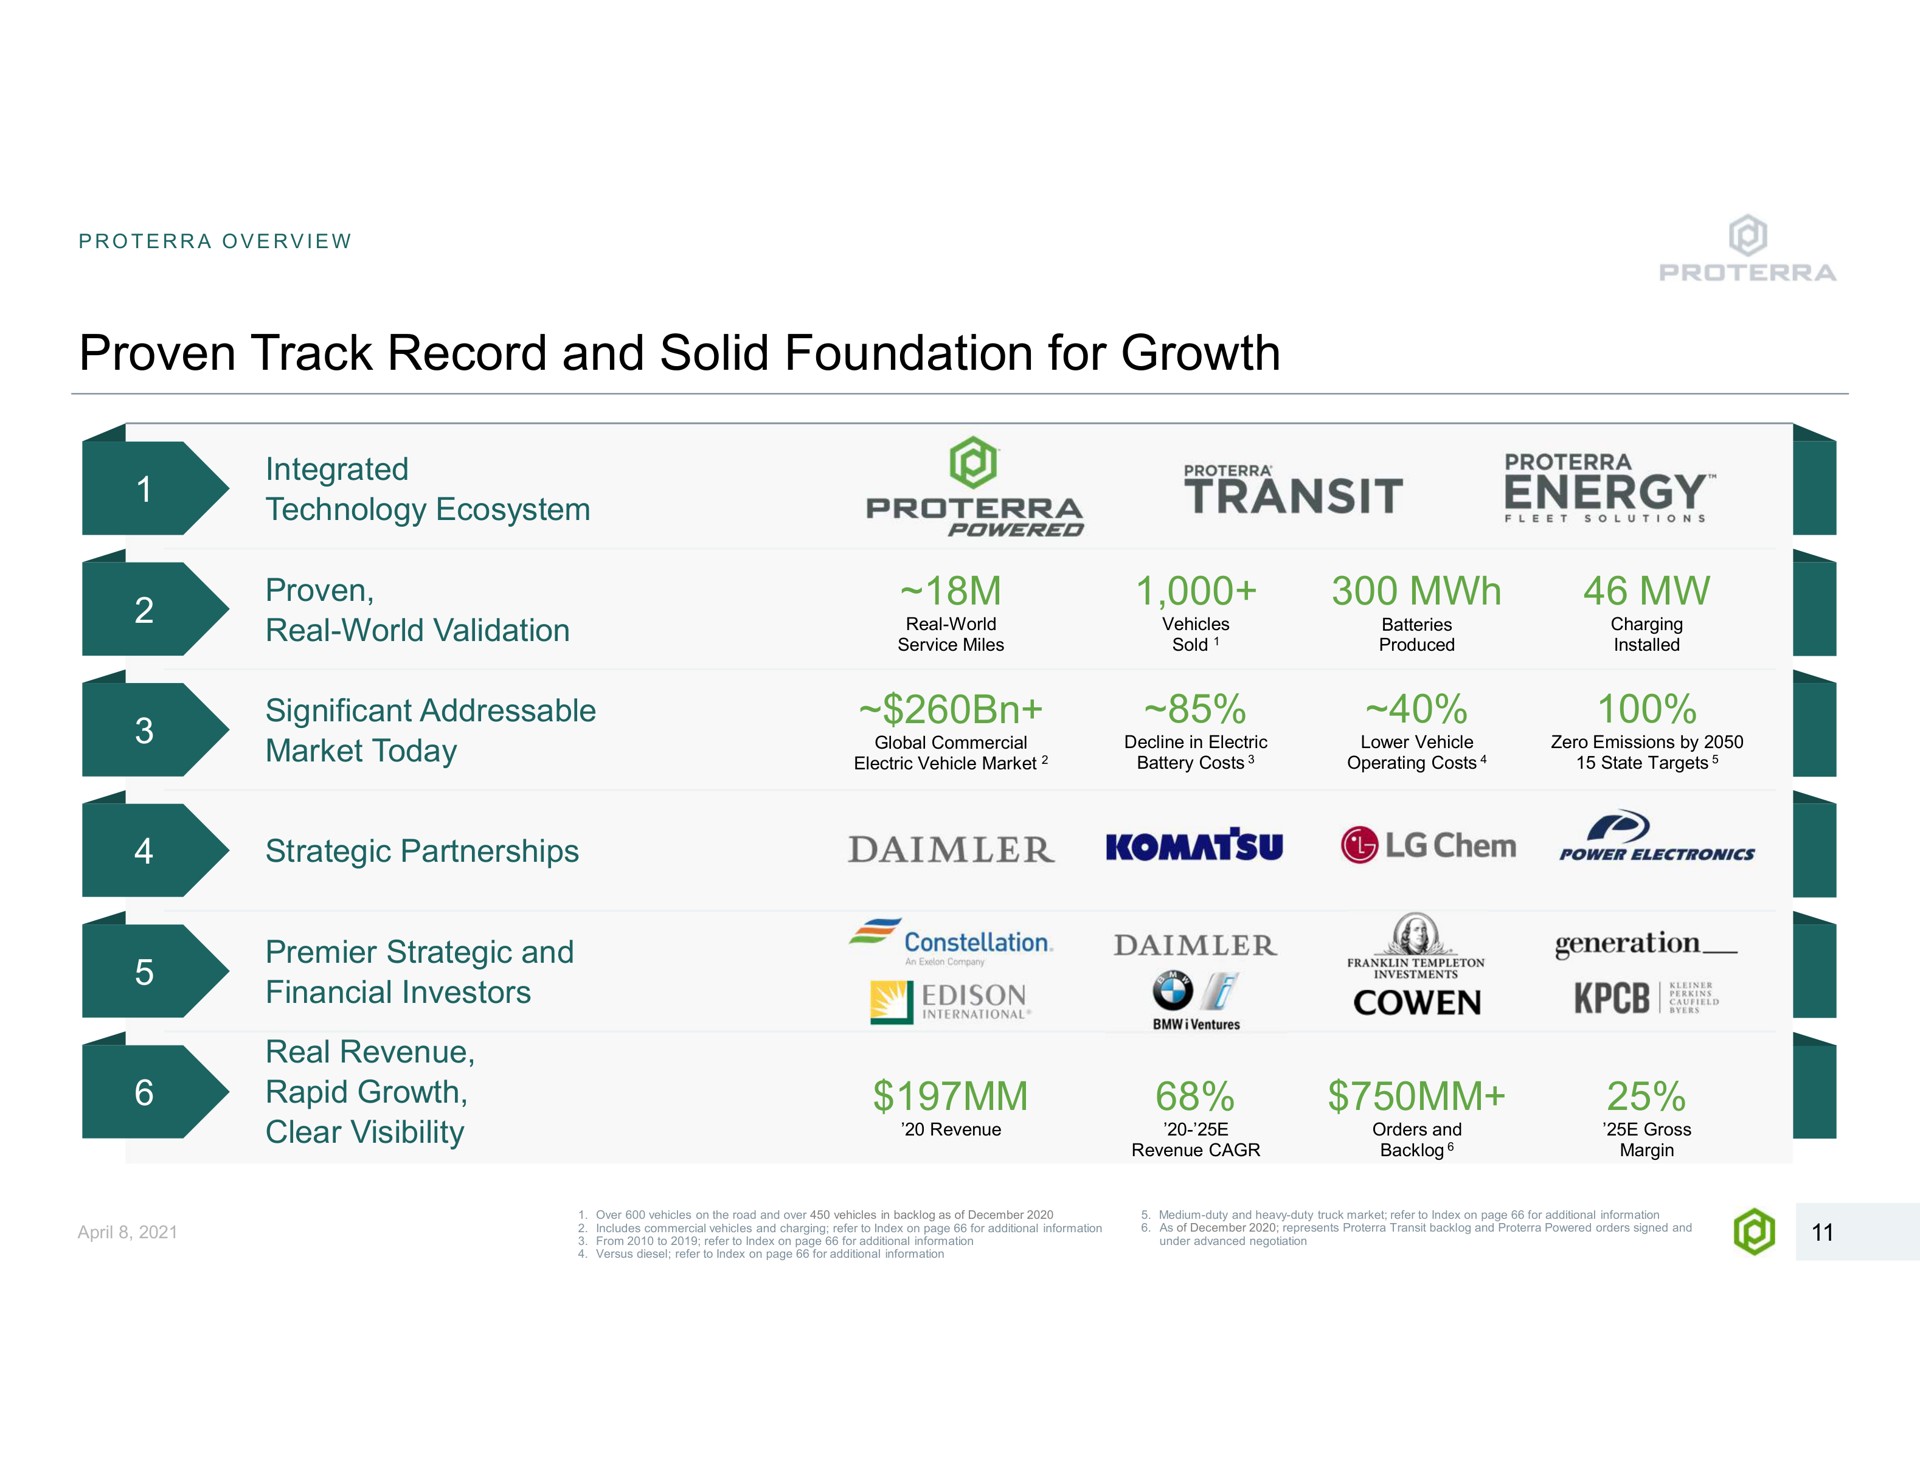 proven track record and solid foundation for growth overview integrated technology ecosystem real world validation significant market today powered transit fee are power electronics strategic premier strategic financial investors real revenue rapid clear visibility constellation of i ventures generation revenue revenue orders backlog gross margin over vehicles on the road over vehicles in backlog as of includes commercial vehicles page additional information from to refer to index versus diesel information refer to index on page medium duty duty ruck market refer index on page sal information of represents under advanced negotiation transit backlog orders signed | Proterra